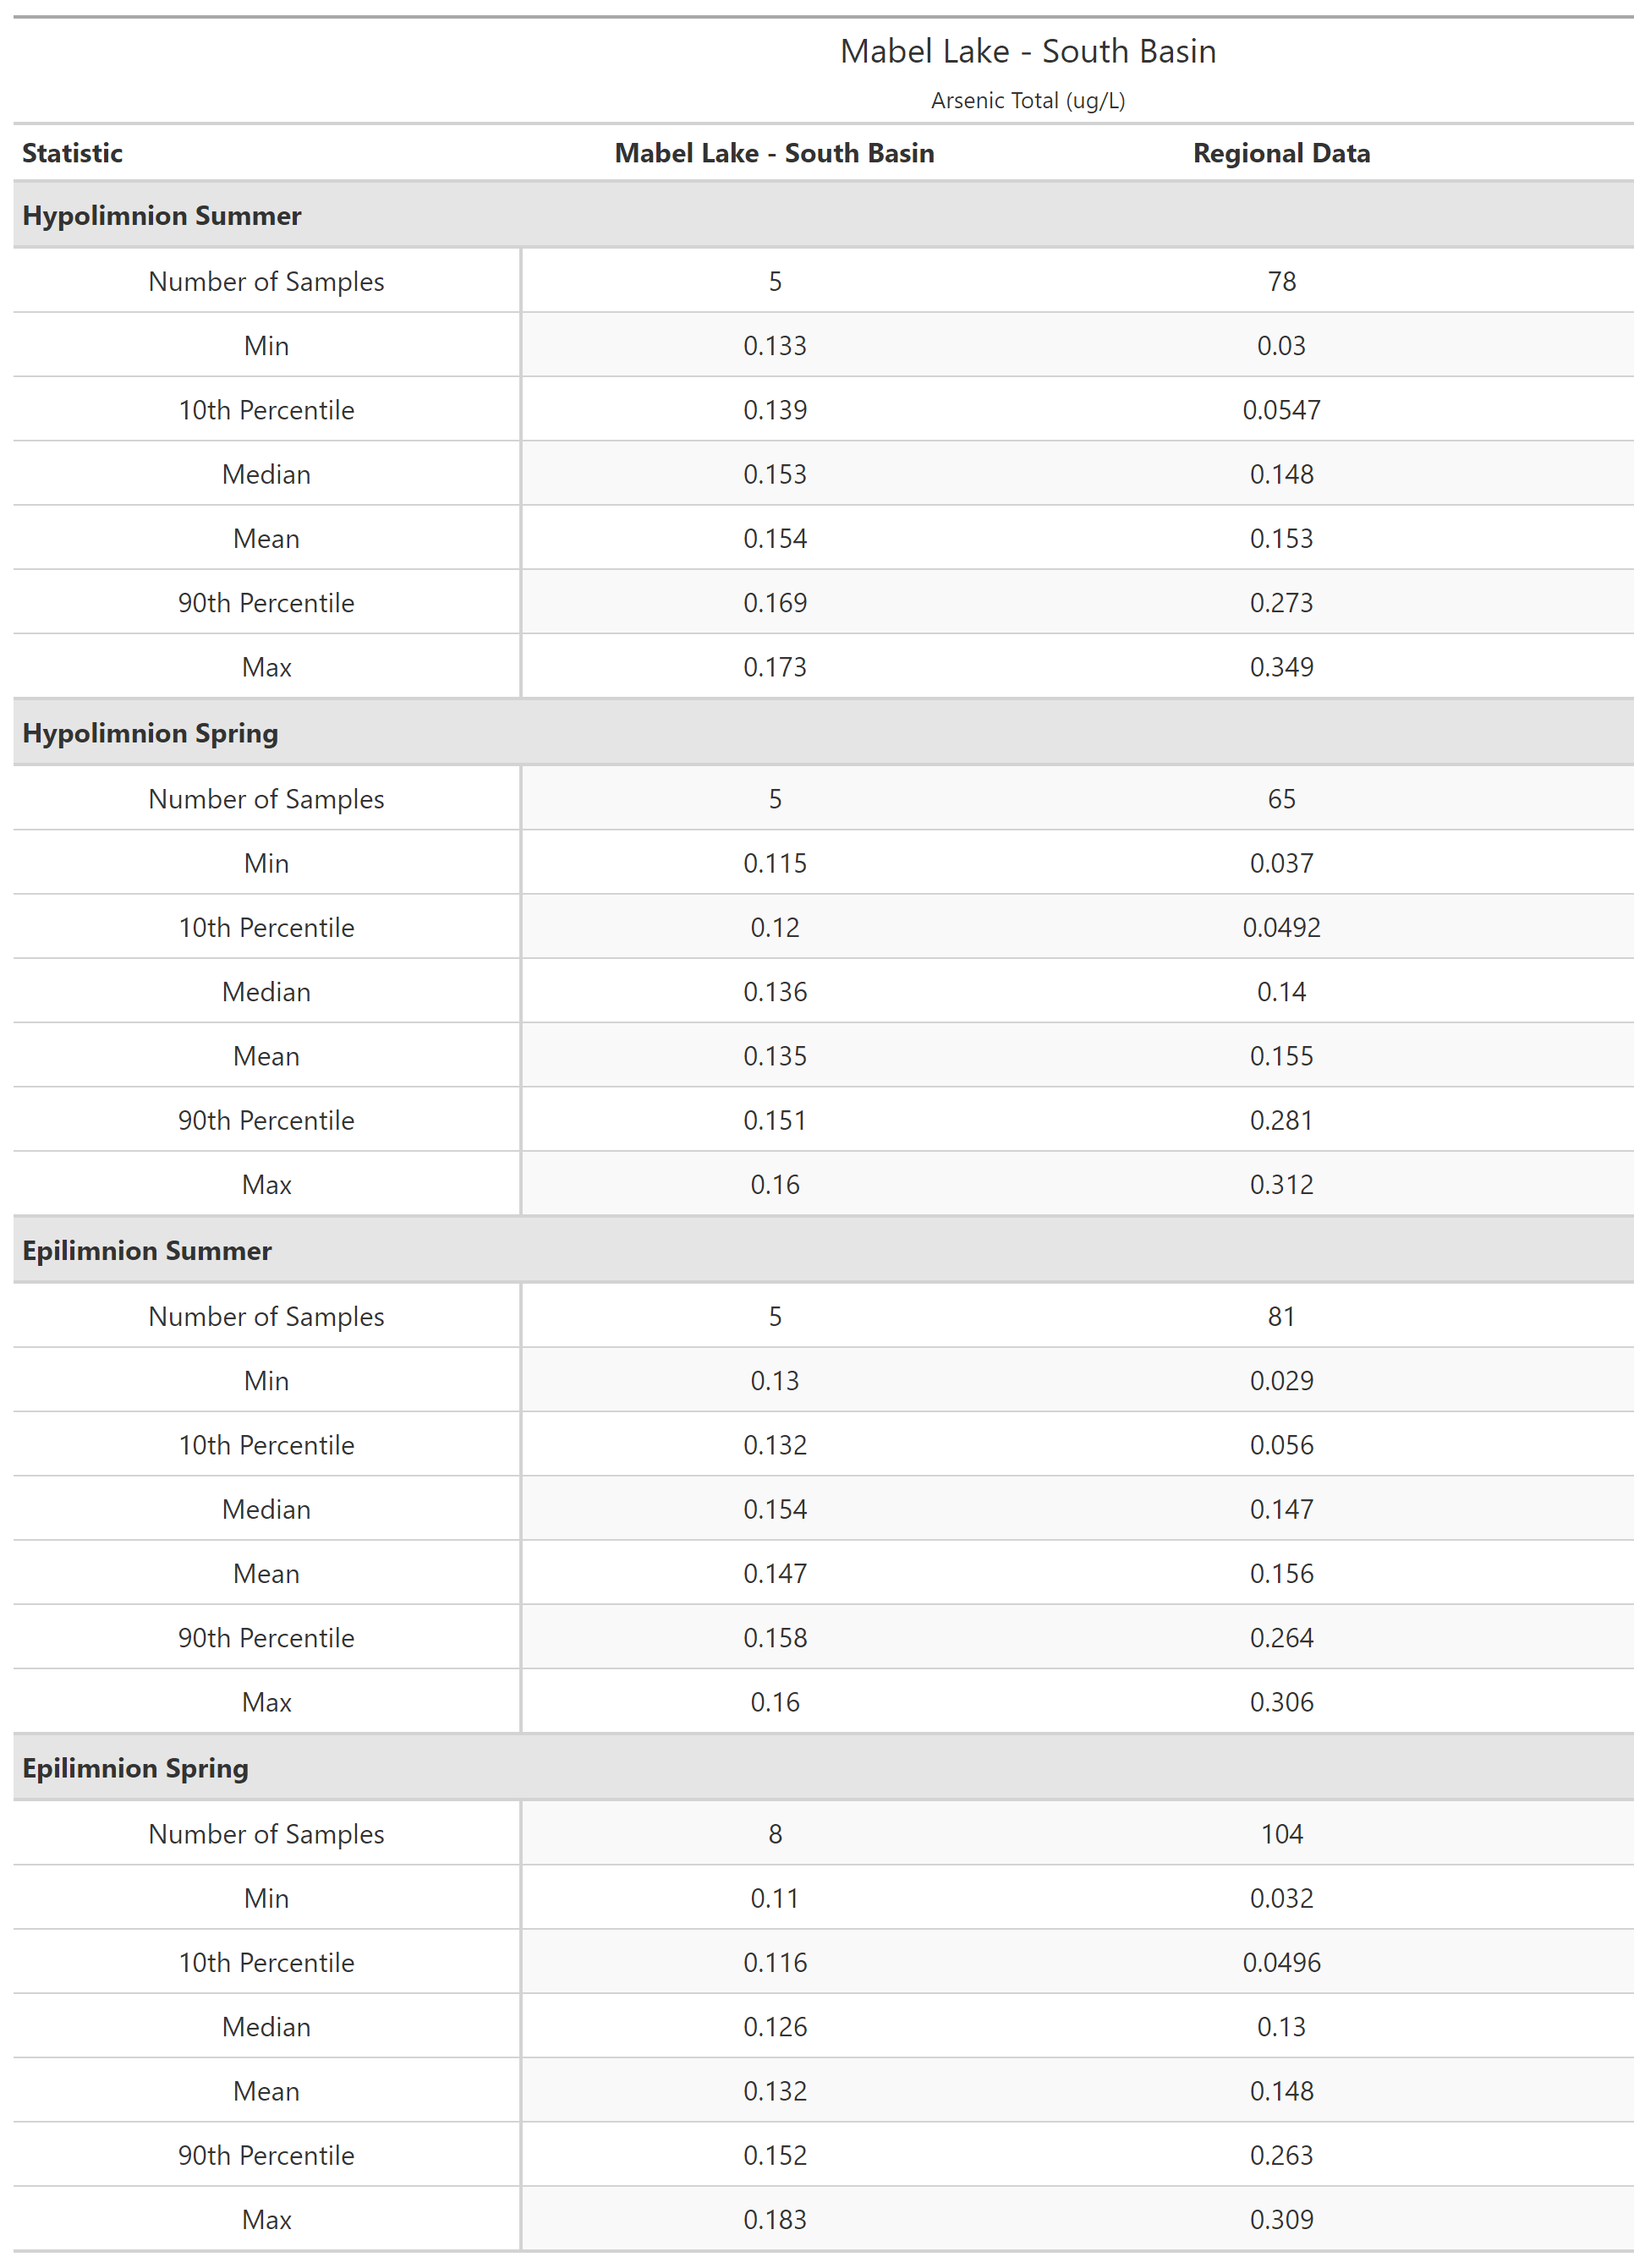 A table of summary statistics for Arsenic Total with comparison to regional data